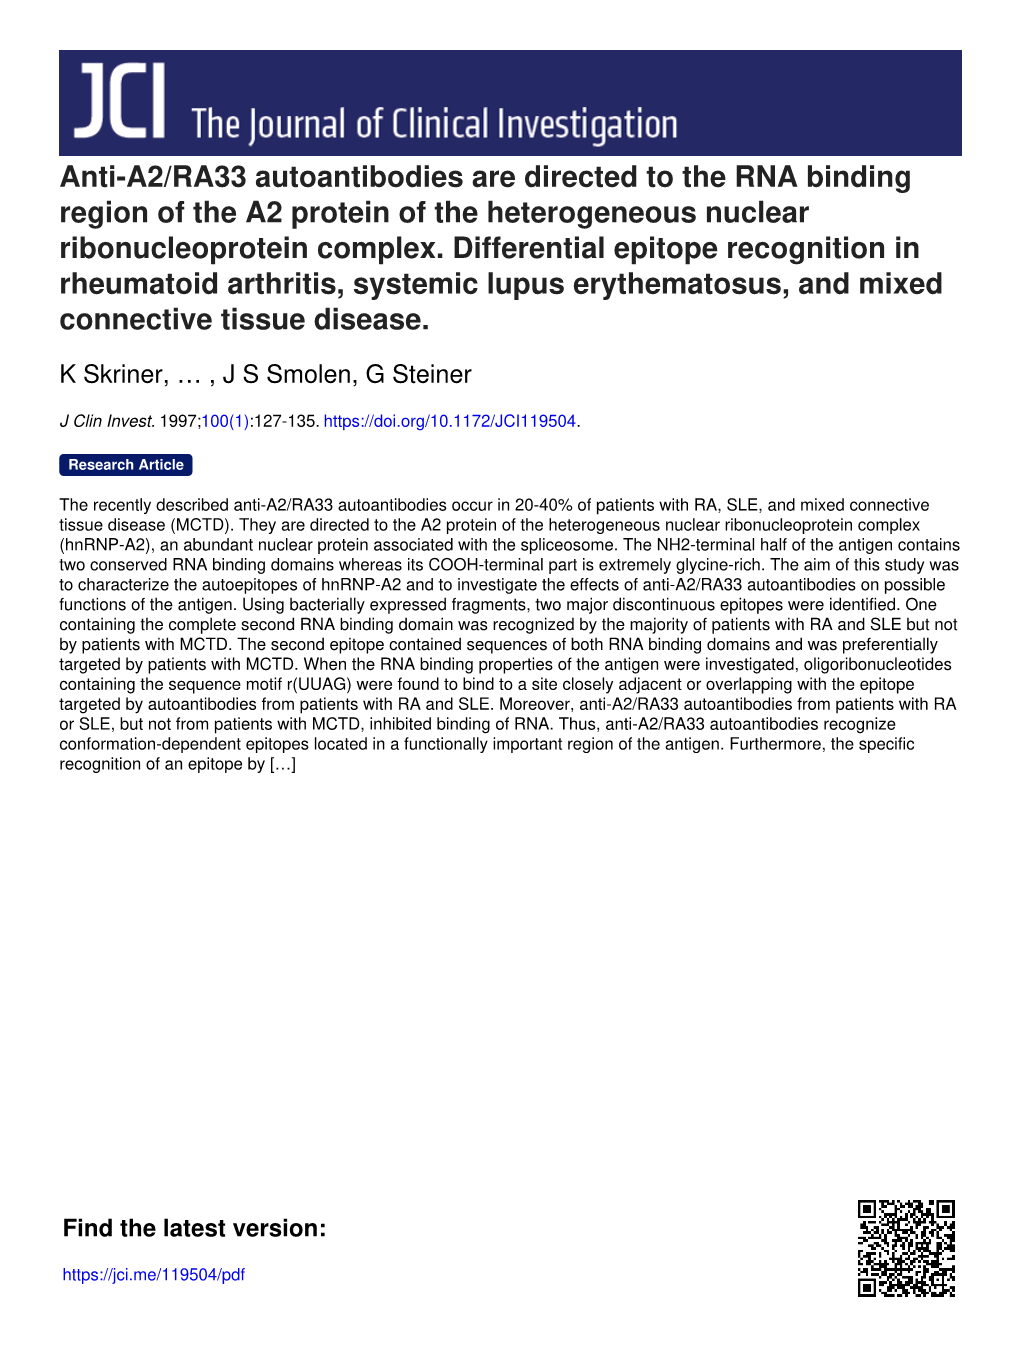 Anti-A2/RA33 Autoantibodies Are Directed to the RNA Binding Region of the A2 Protein of the Heterogeneous Nuclear Ribonucleoprotein Complex